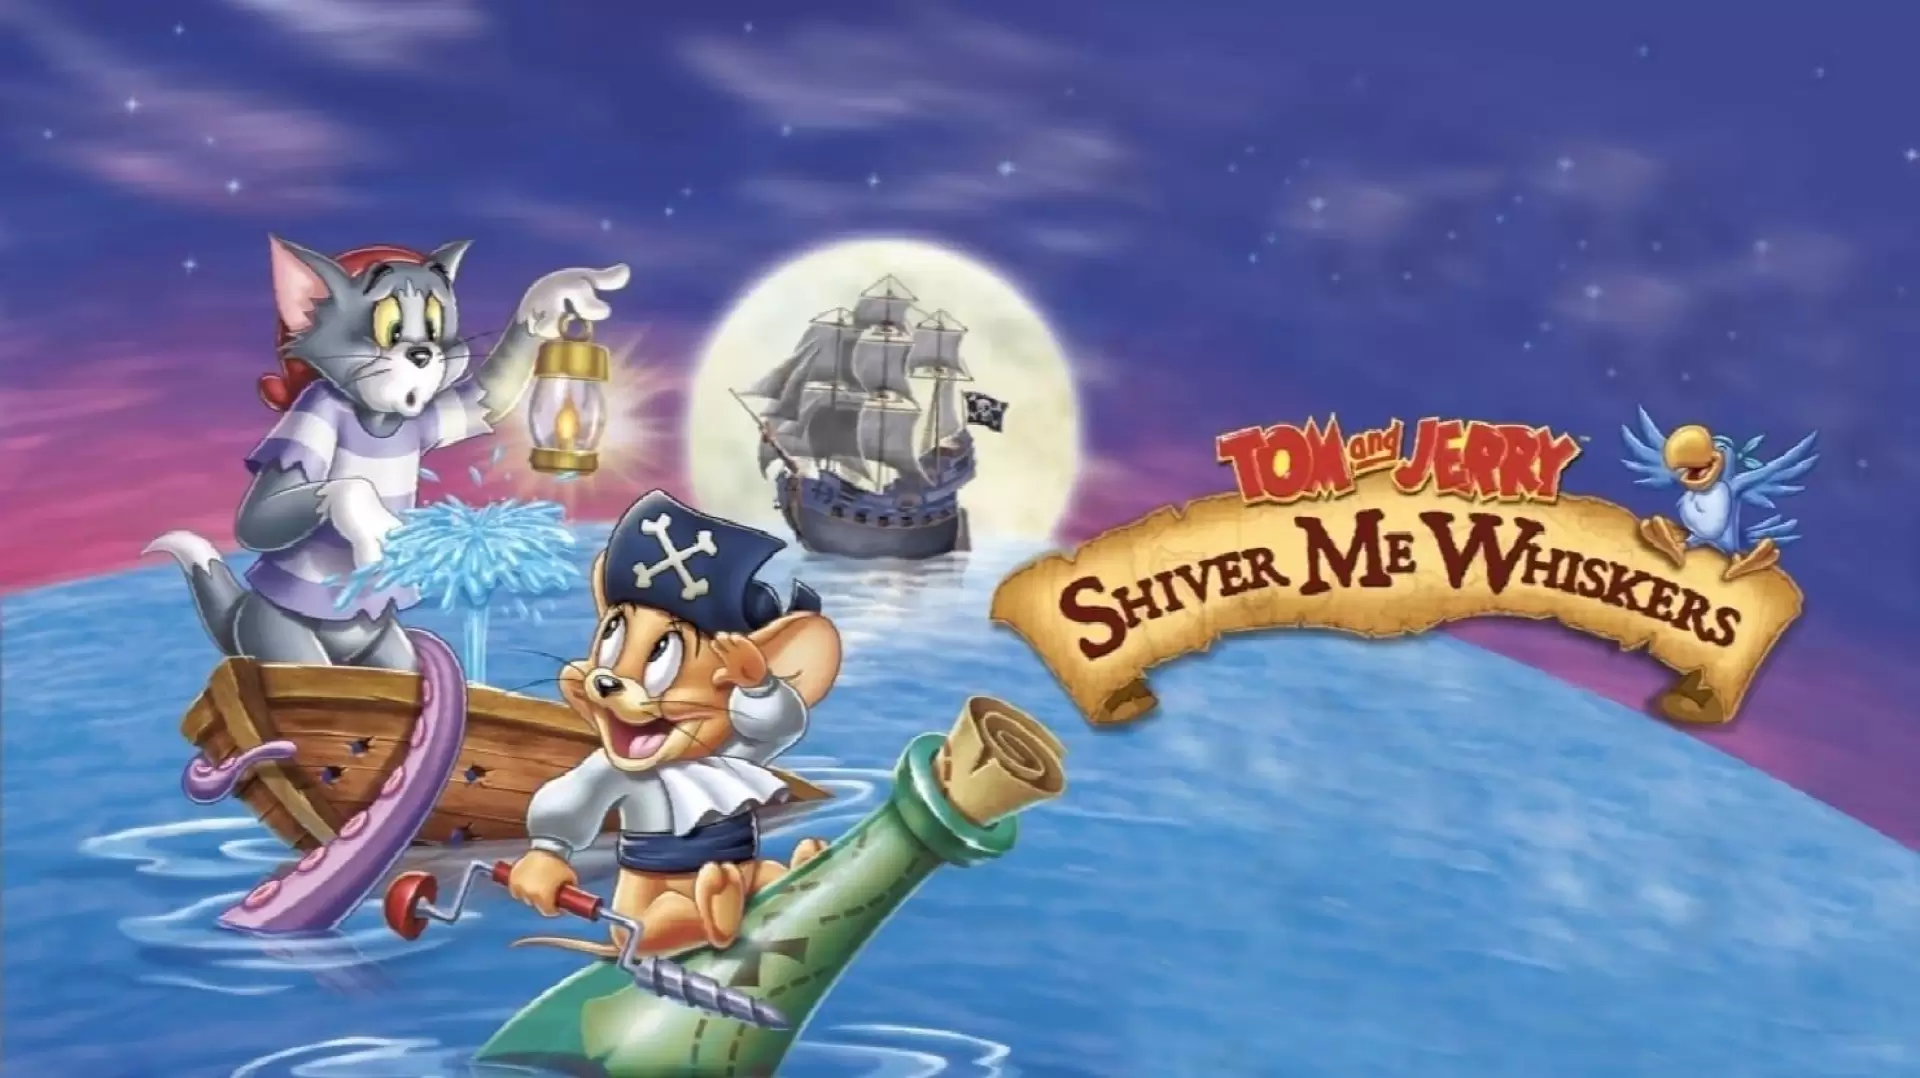 دانلود انیمیشن Tom and Jerry in Shiver Me Whiskers 2006